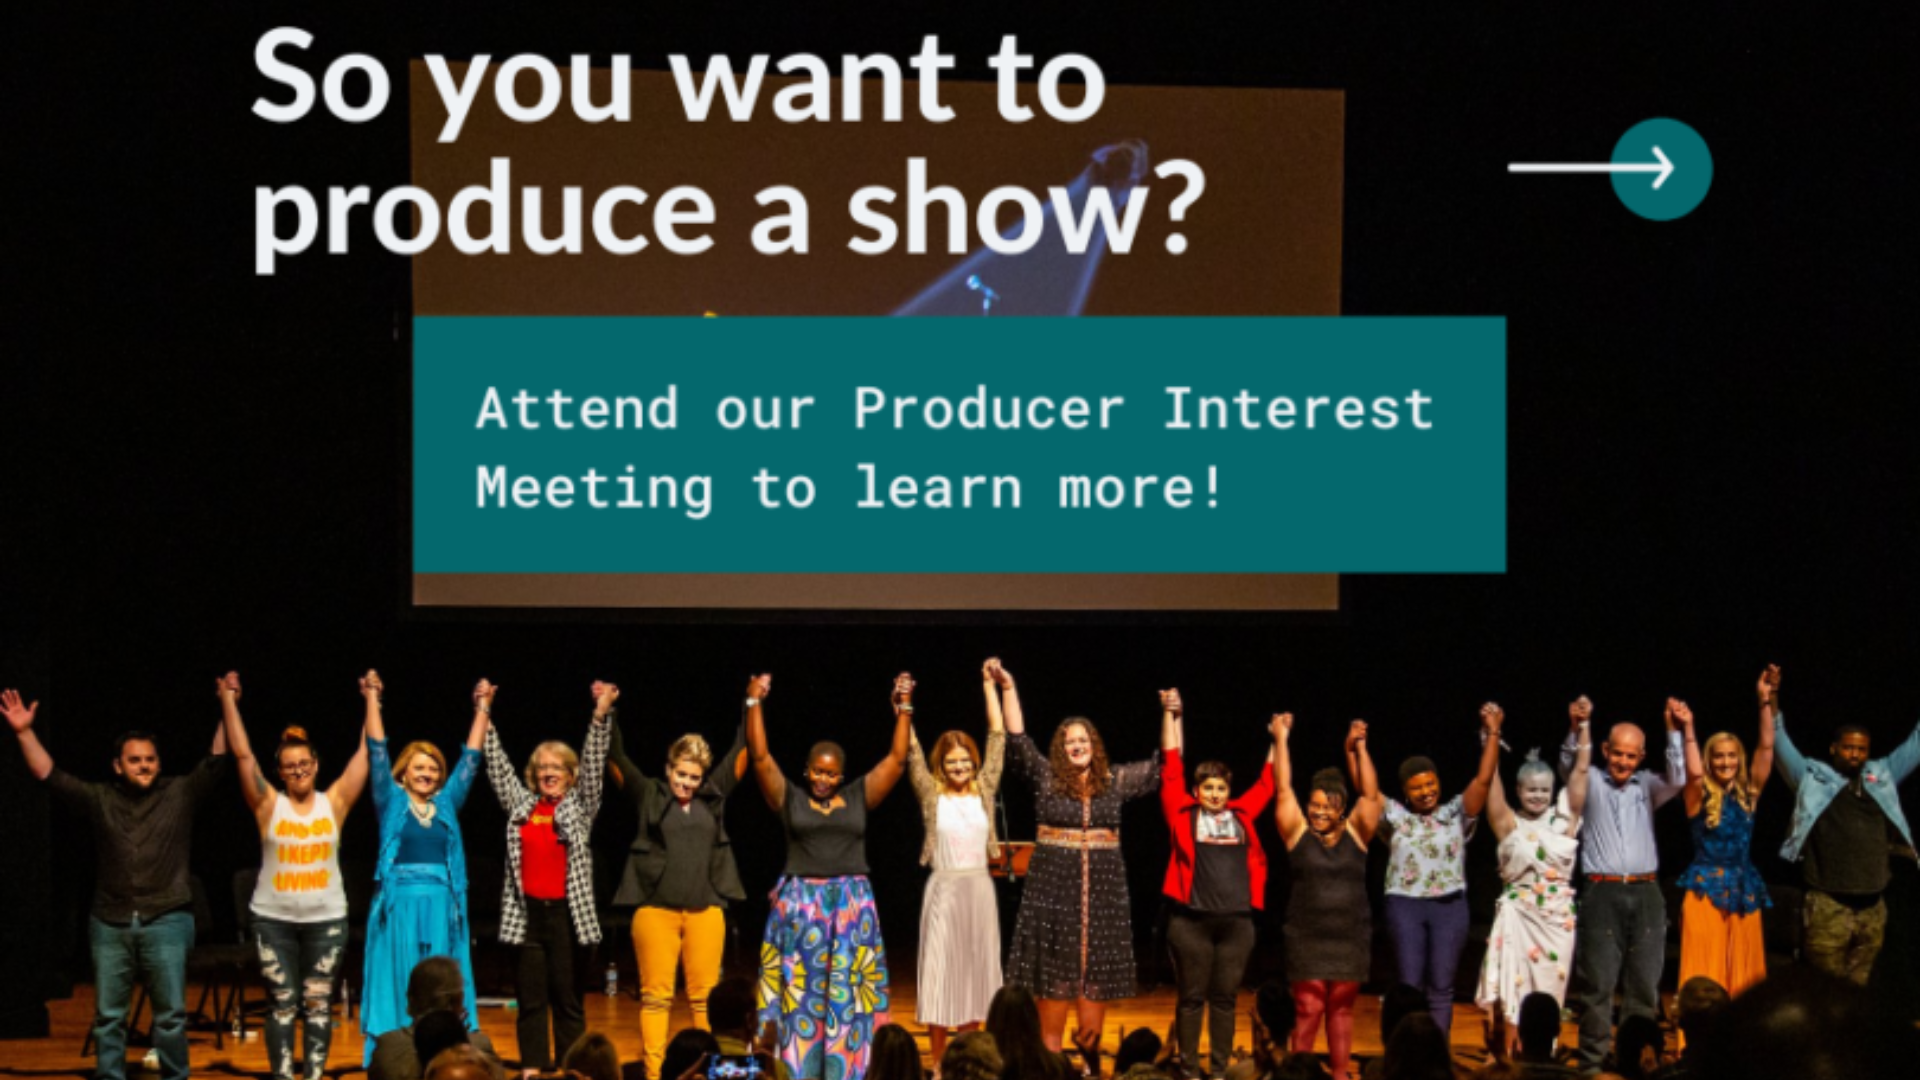 The text "So you want to produce a show?" appears above a line of storytellers holding hands, raised before their final bow